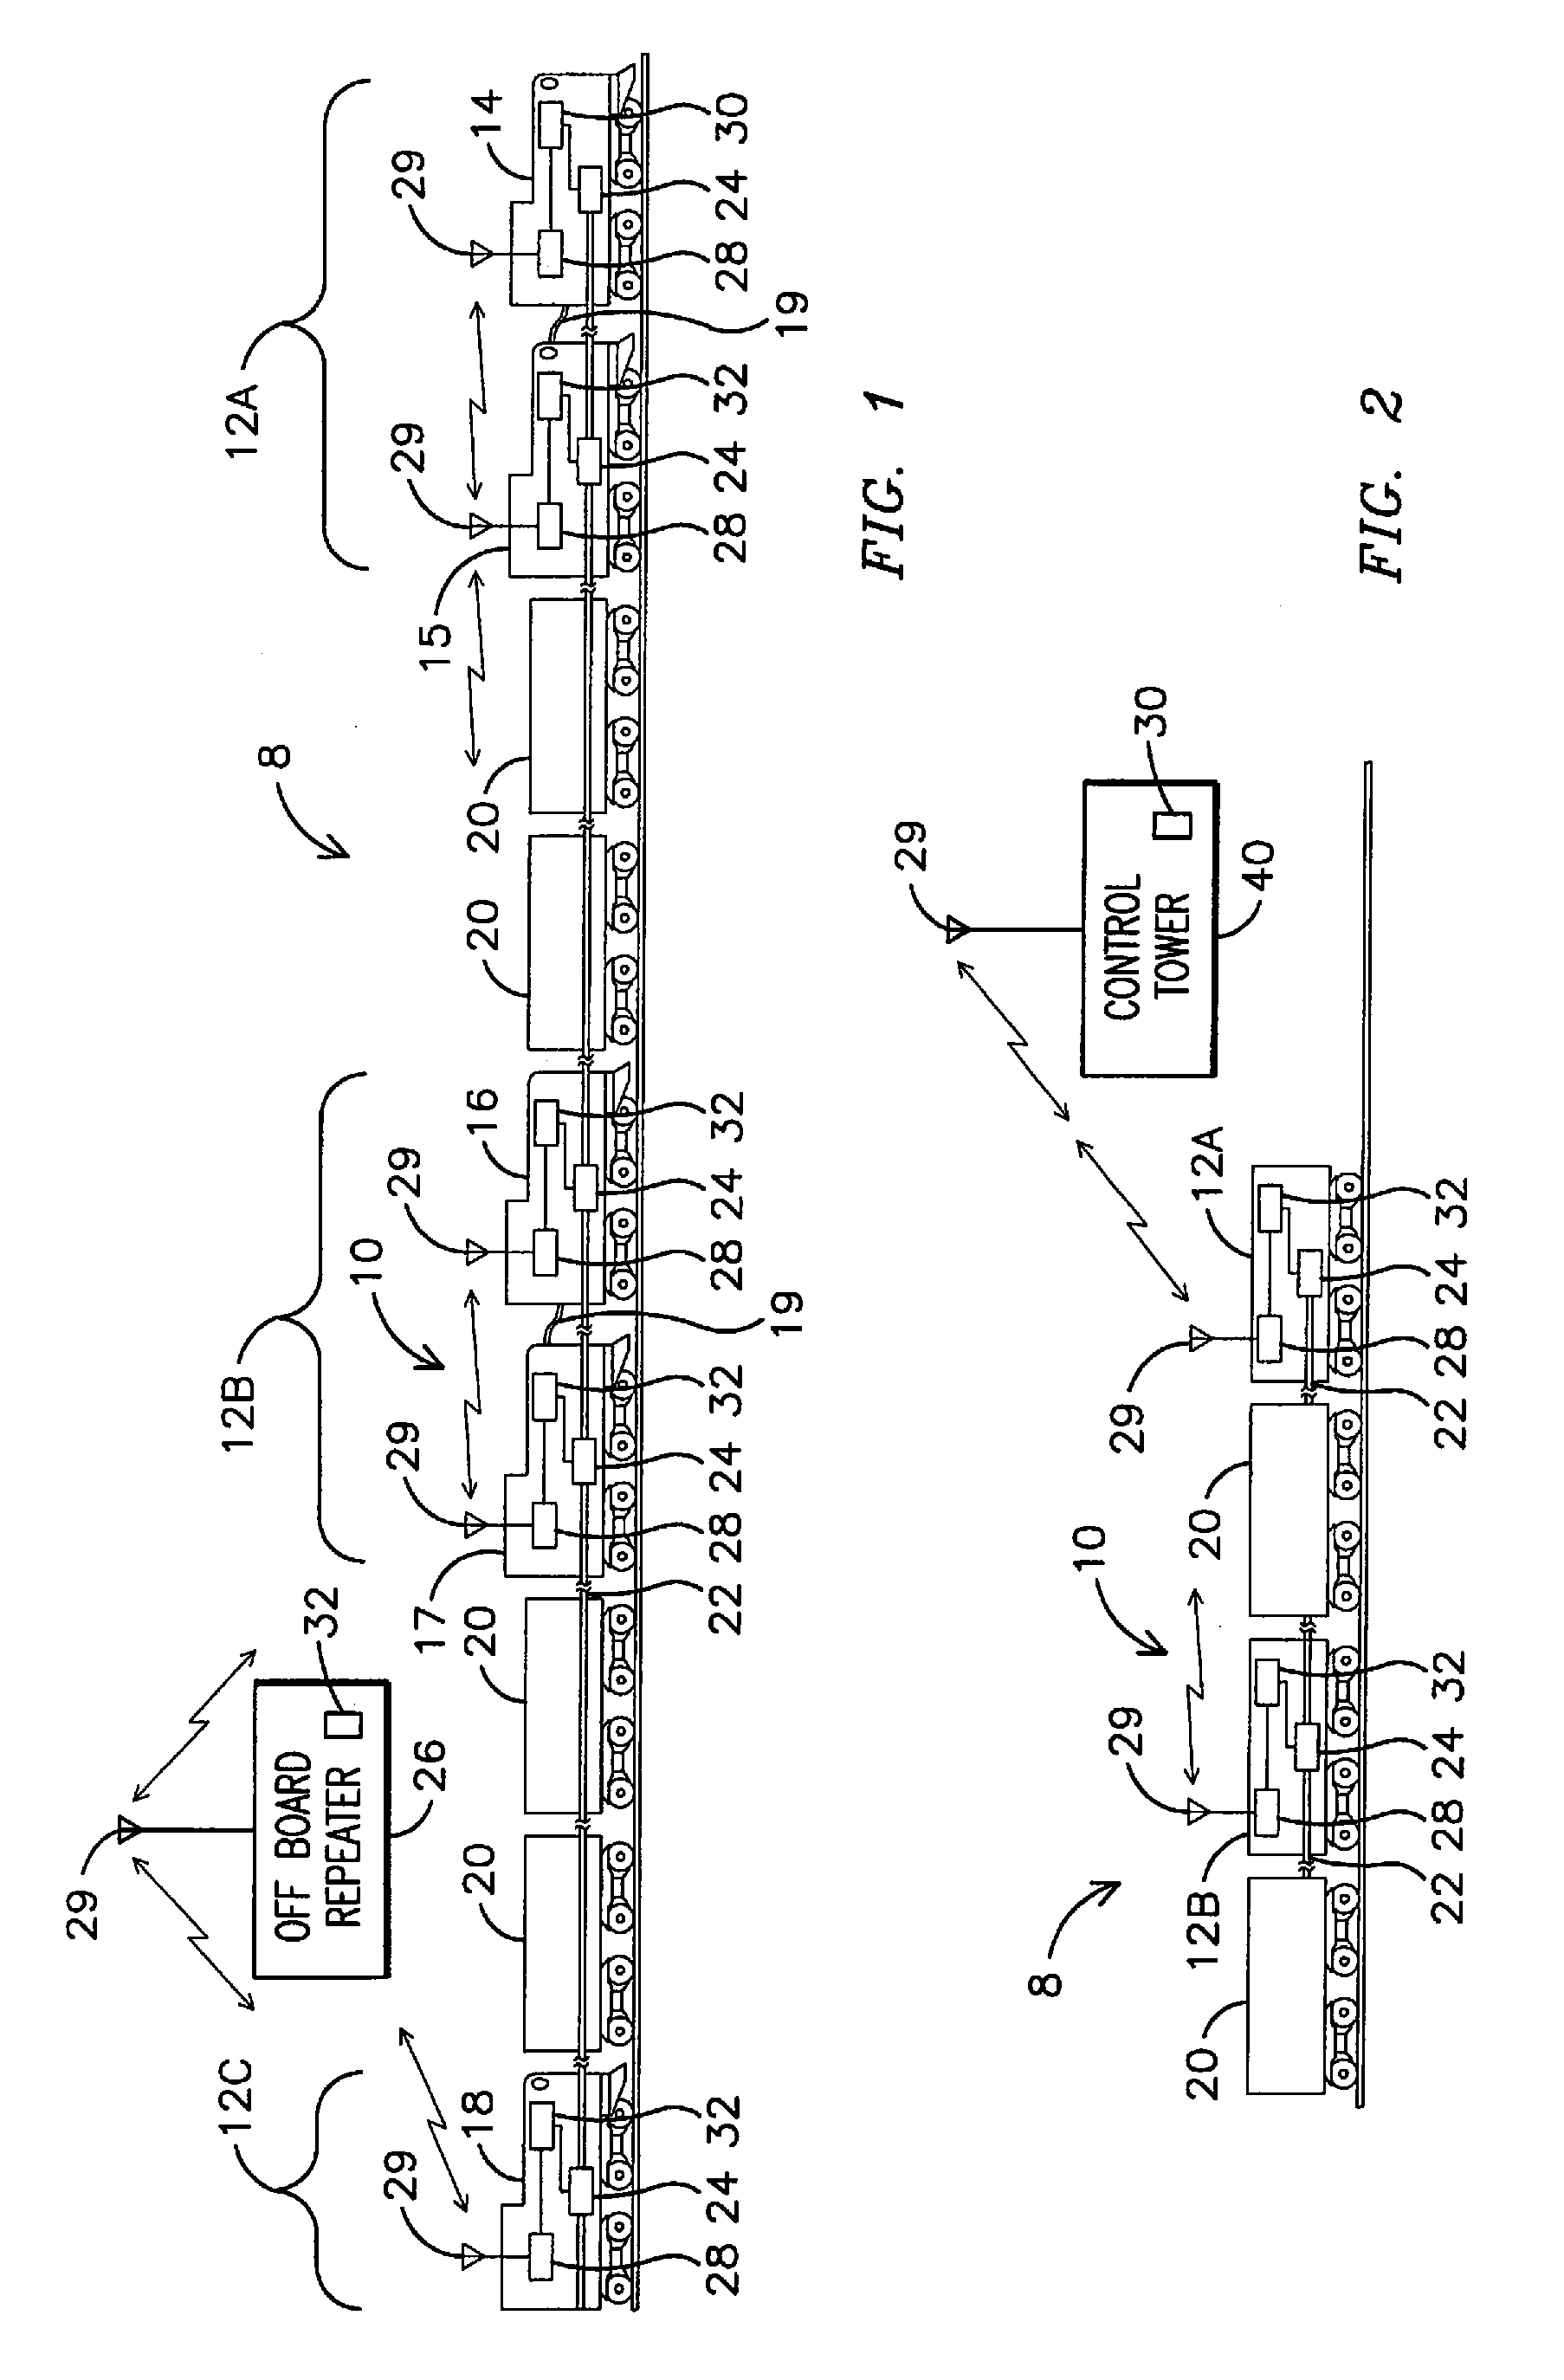 Method and apparatus for optimizing railroad train operation for a train including multiple distributed-power locomotives